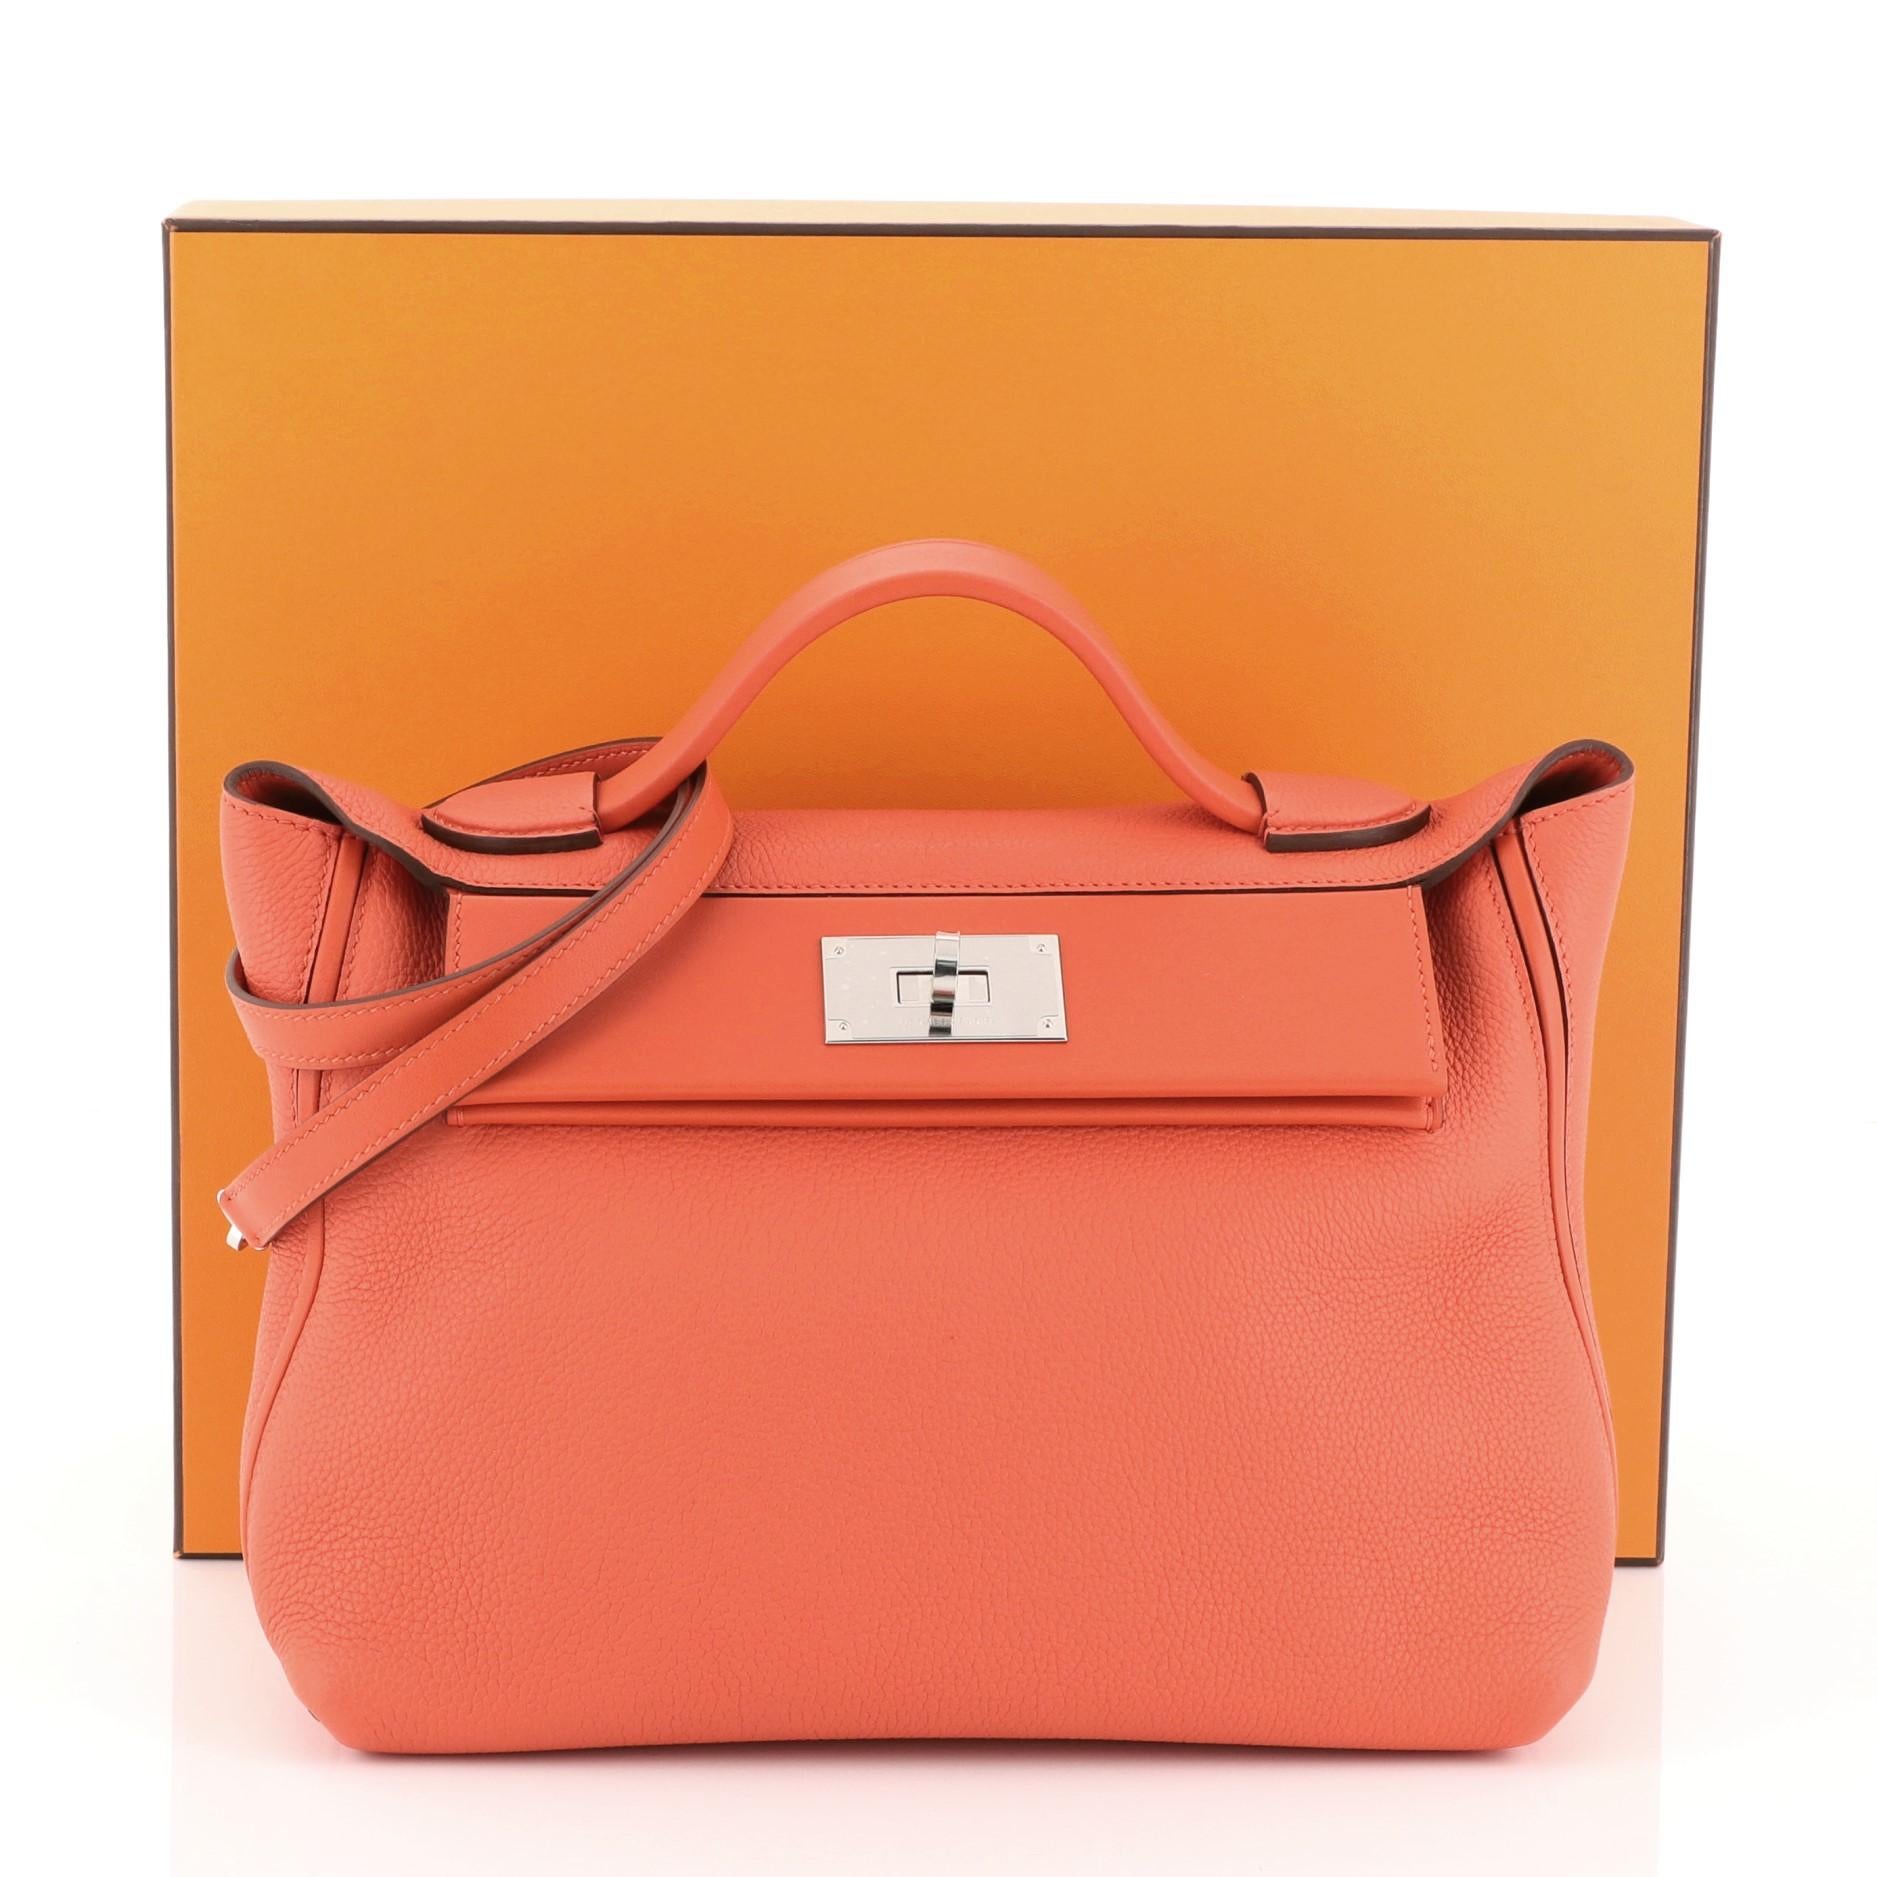 This Hermes 24/24 Handbag Togo with Swift 29, crafted in Capucine red Togo and Swift leather, features a leather top handle, exterior back slip pocket and palladium hardware. Its turn-lock closure opens to a Capucine red Swift leather interior with